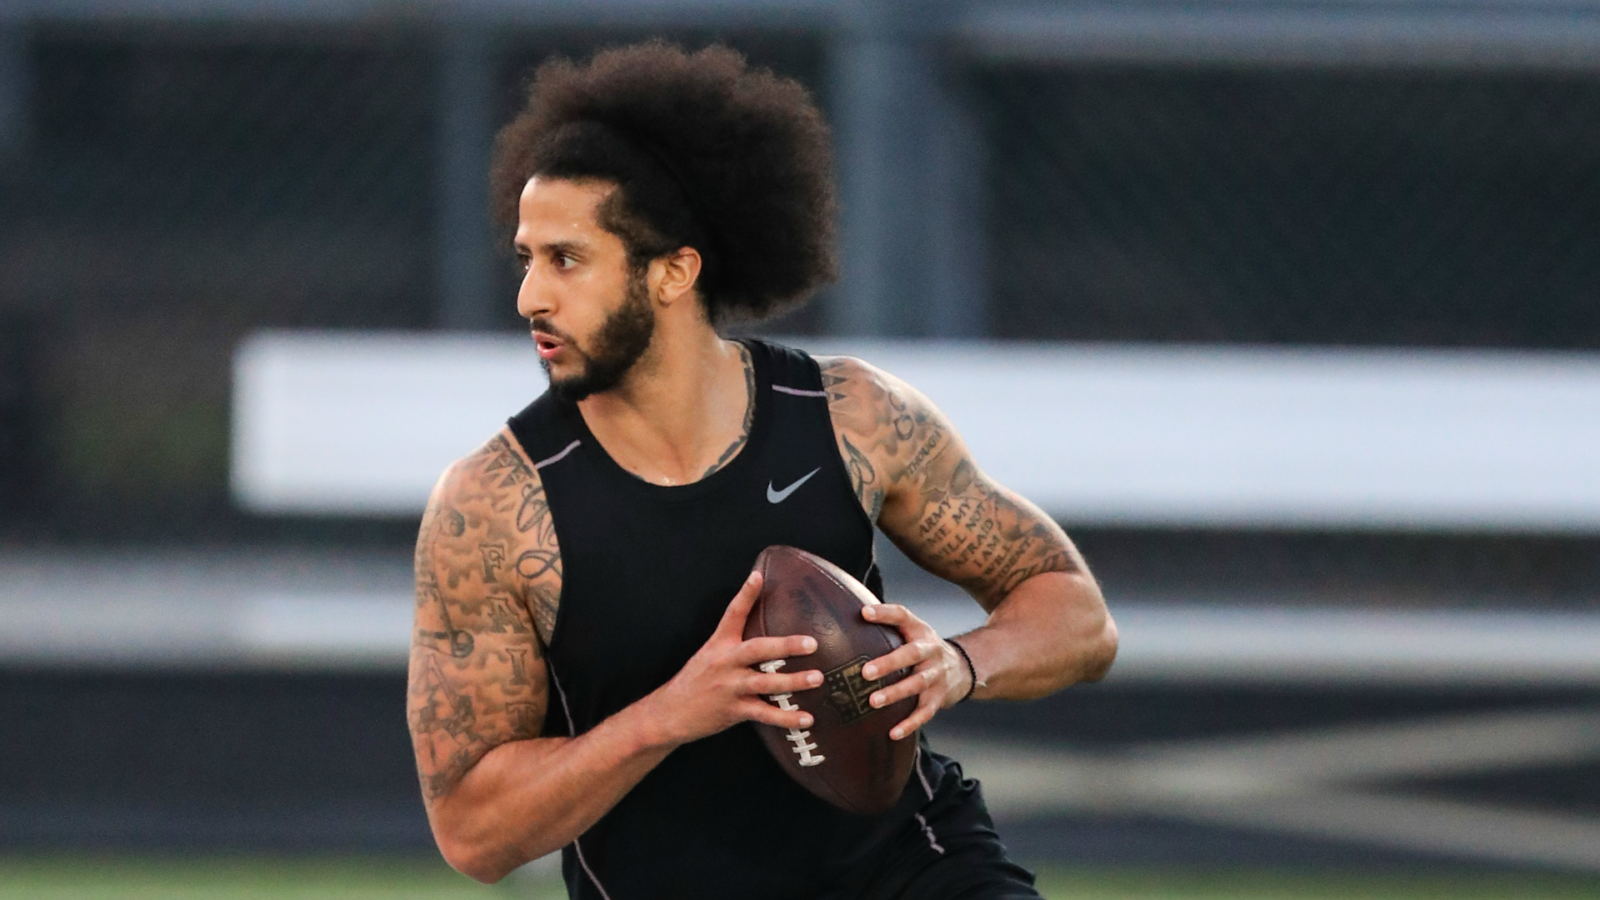 NFL News: Chargers Express Interest in Working Out Colin Kaepernick